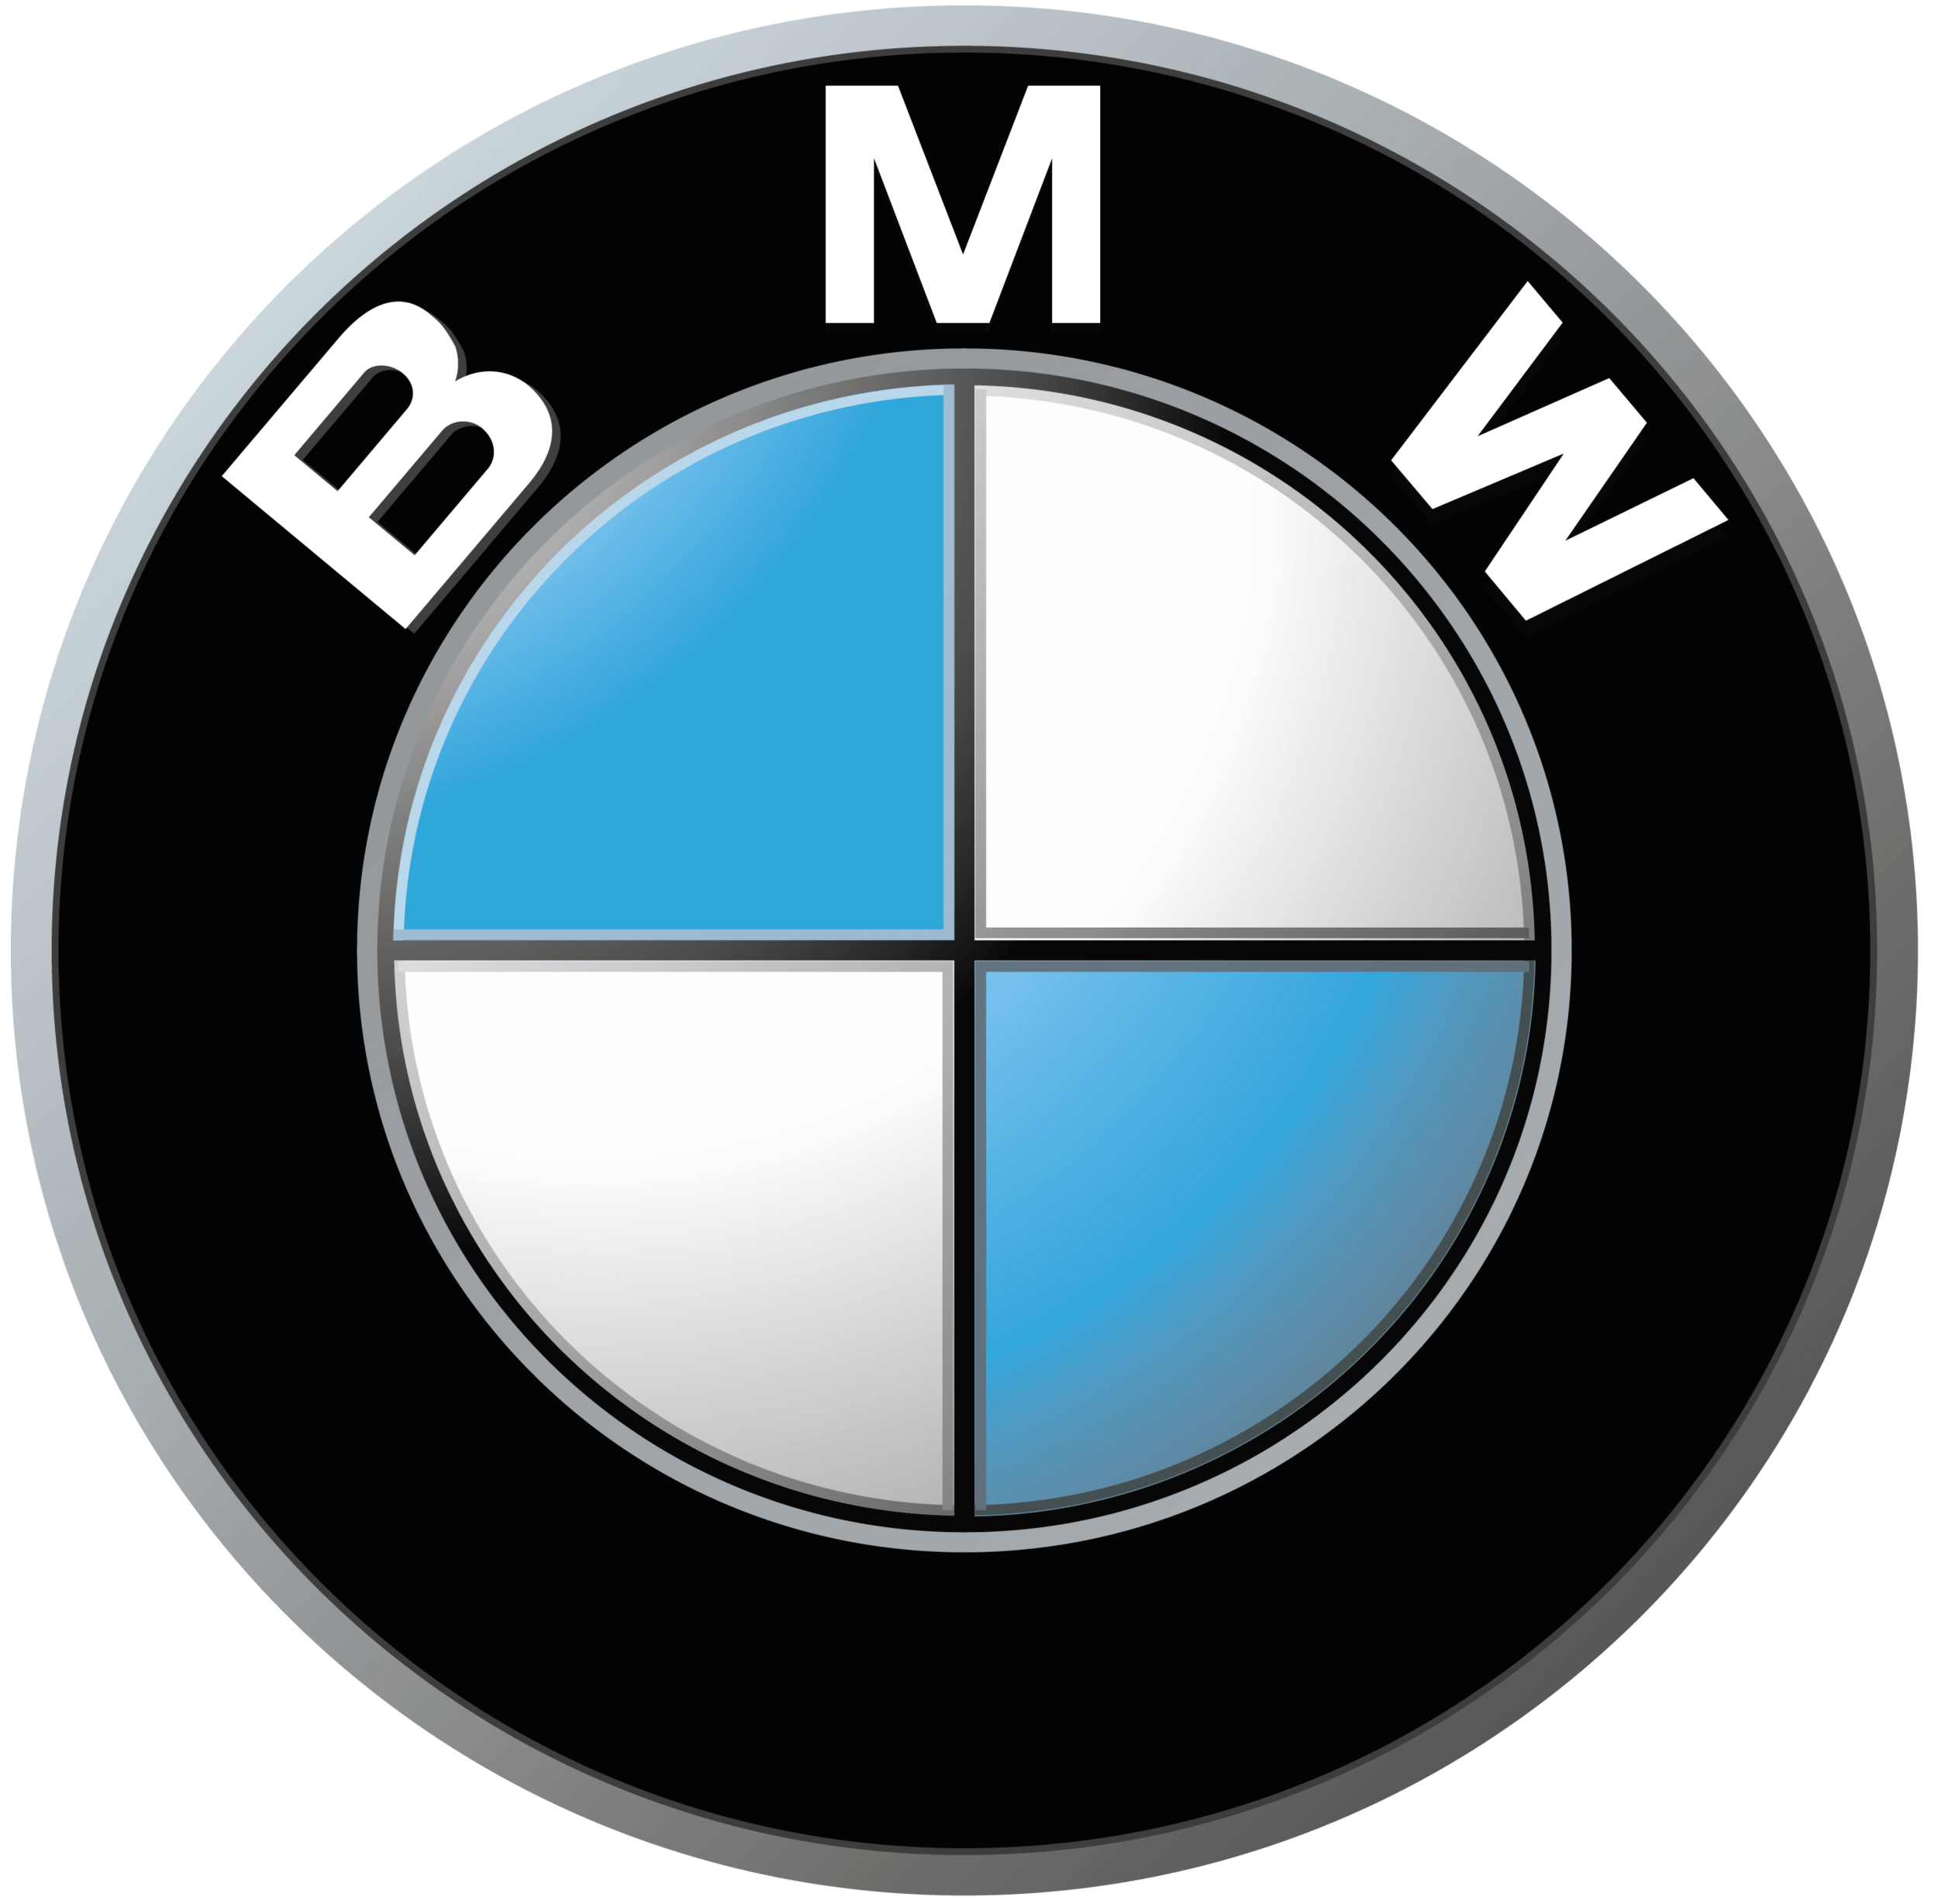 BMW-Logo-Meaning.png